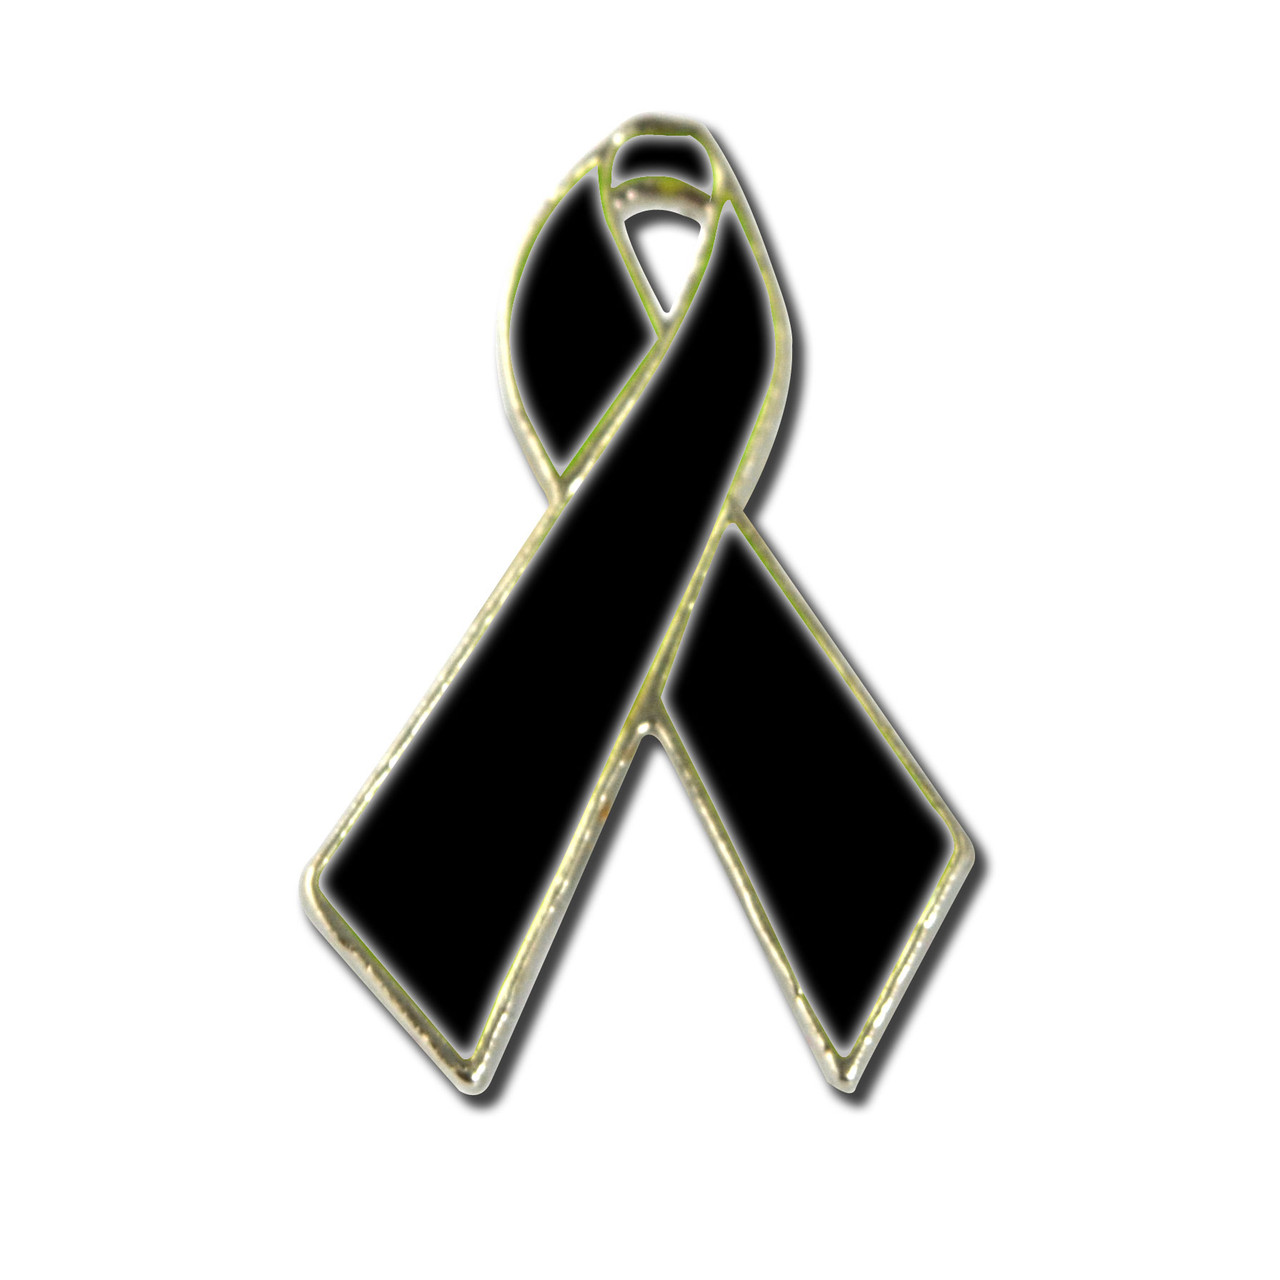 Black Mourning Ribbon Pin Badge For Funerals - Gold Plated